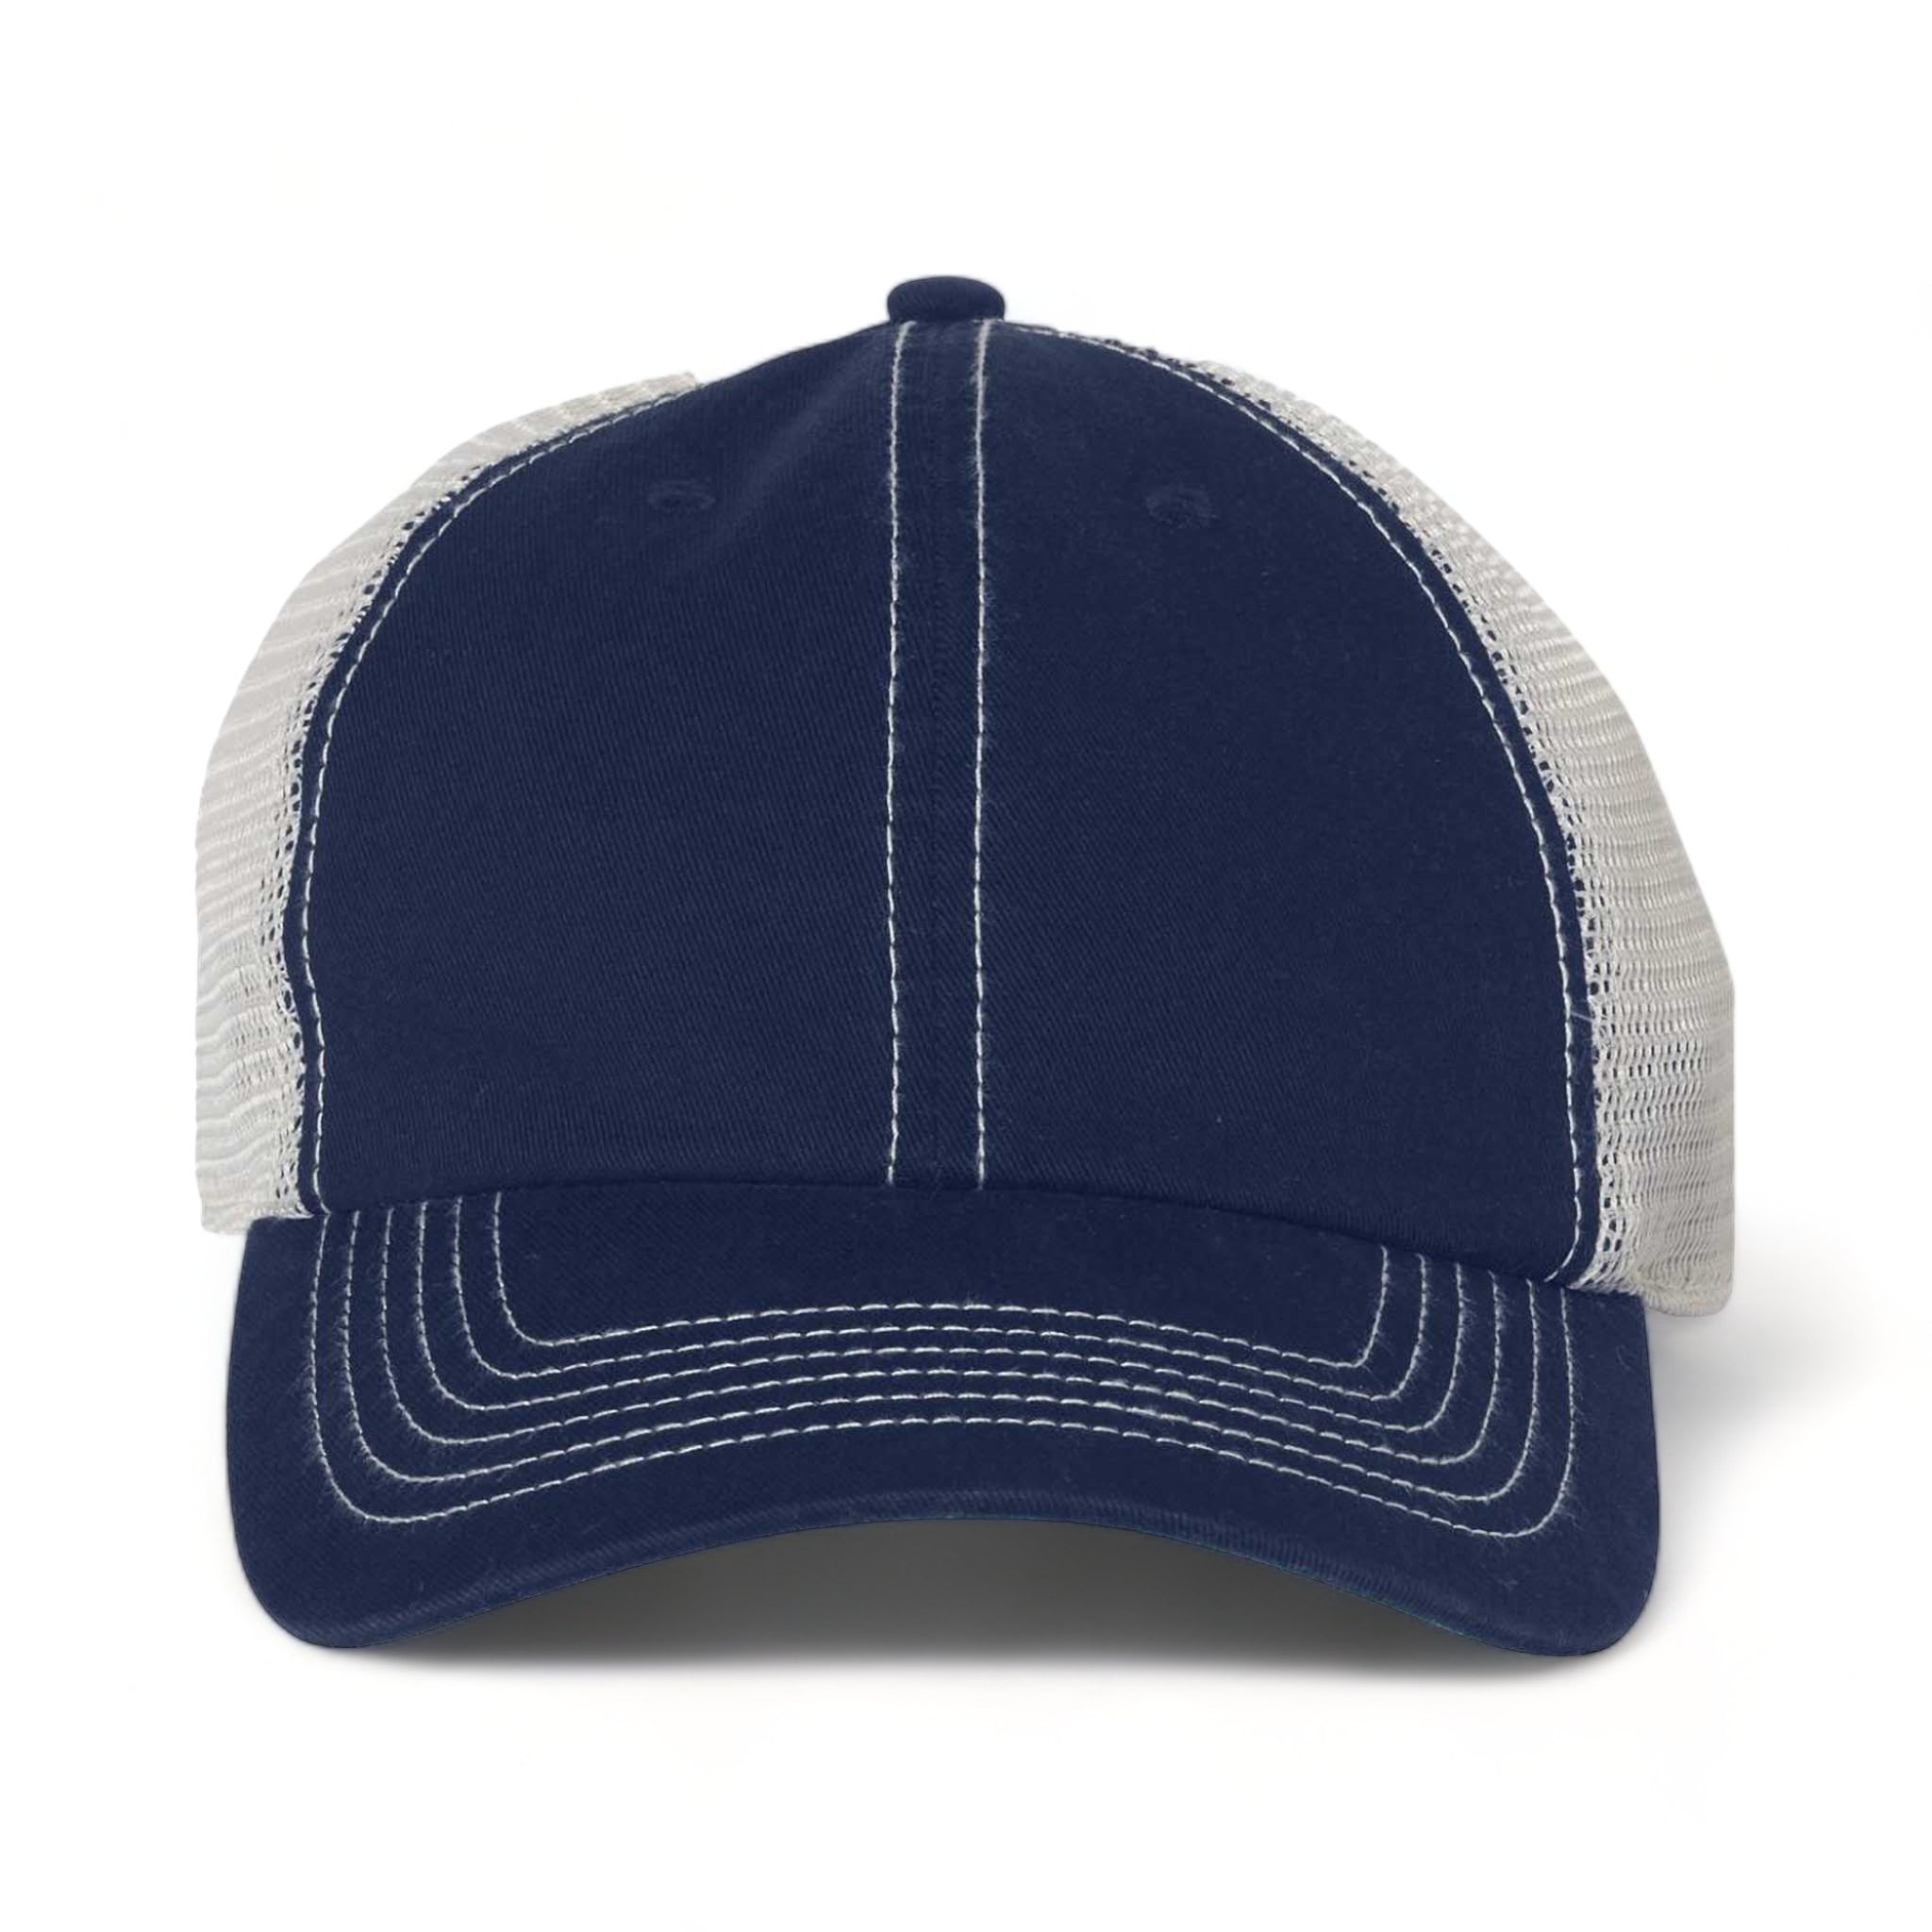 Front view of 47 Brand 4710 custom hat in navy and stone